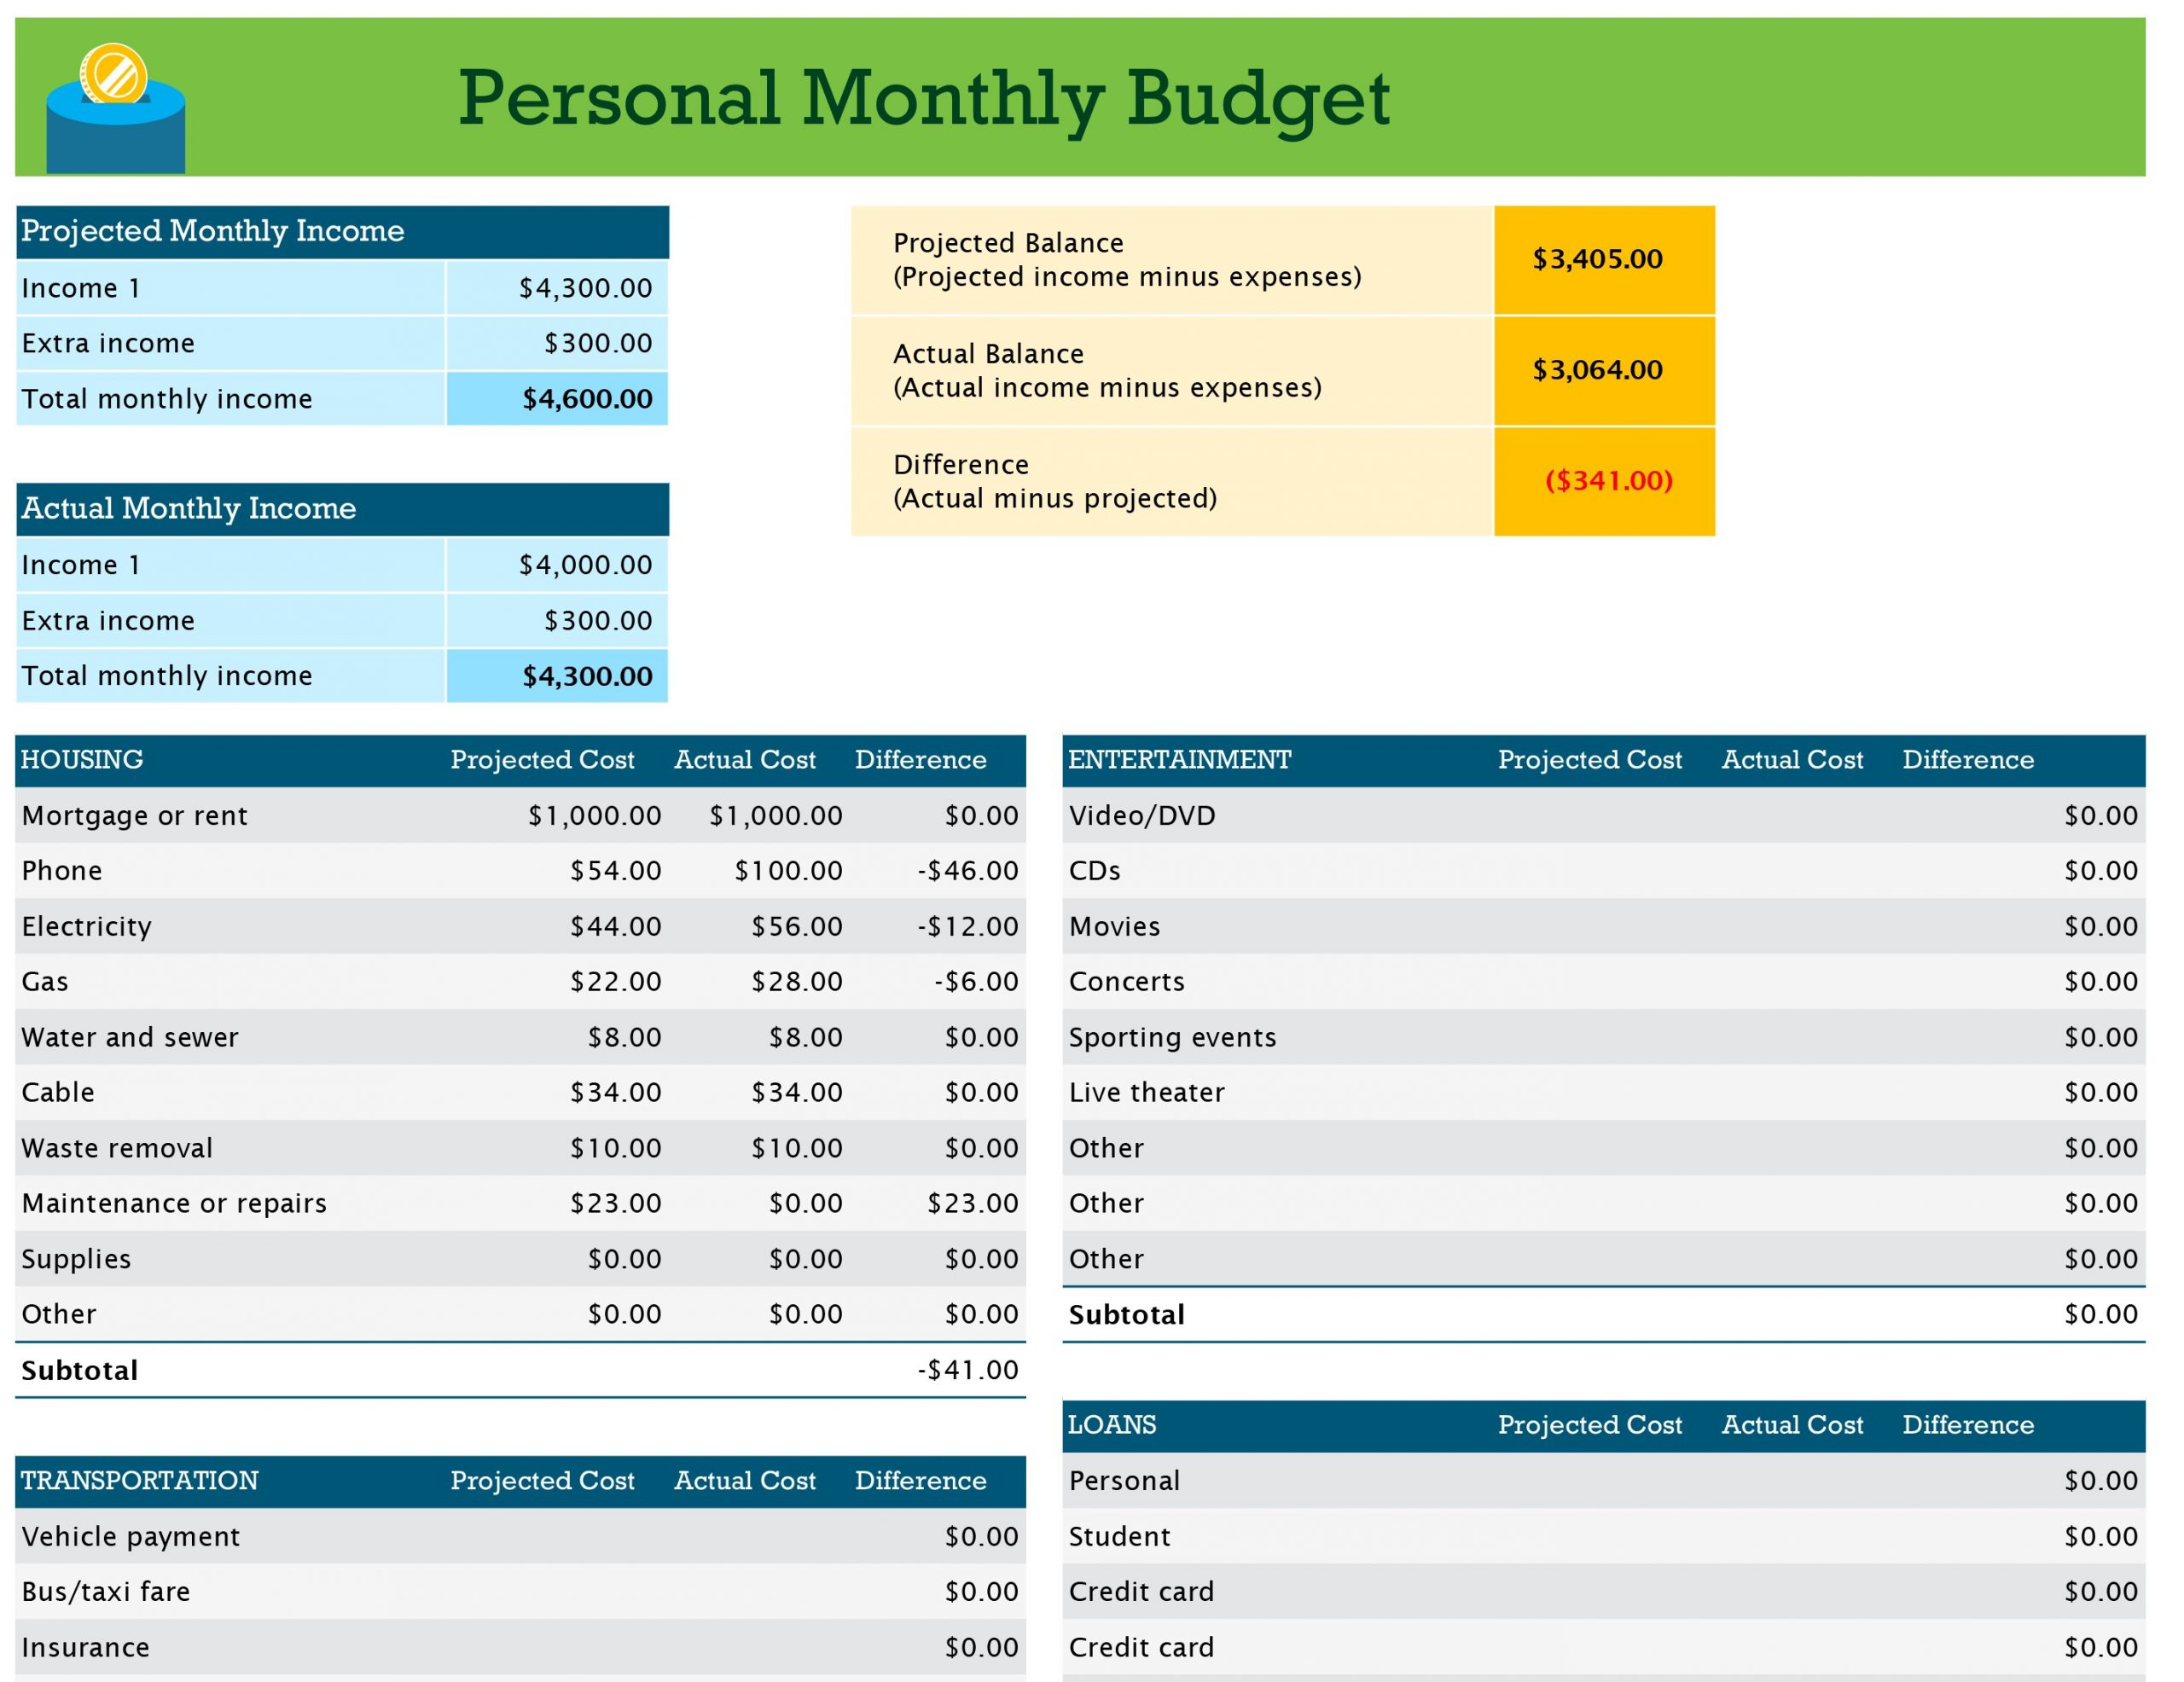 Personal Budget Planner Template  TemplateDose Pertaining To Personal Budget Worksheet Template Throughout Personal Budget Worksheet Template